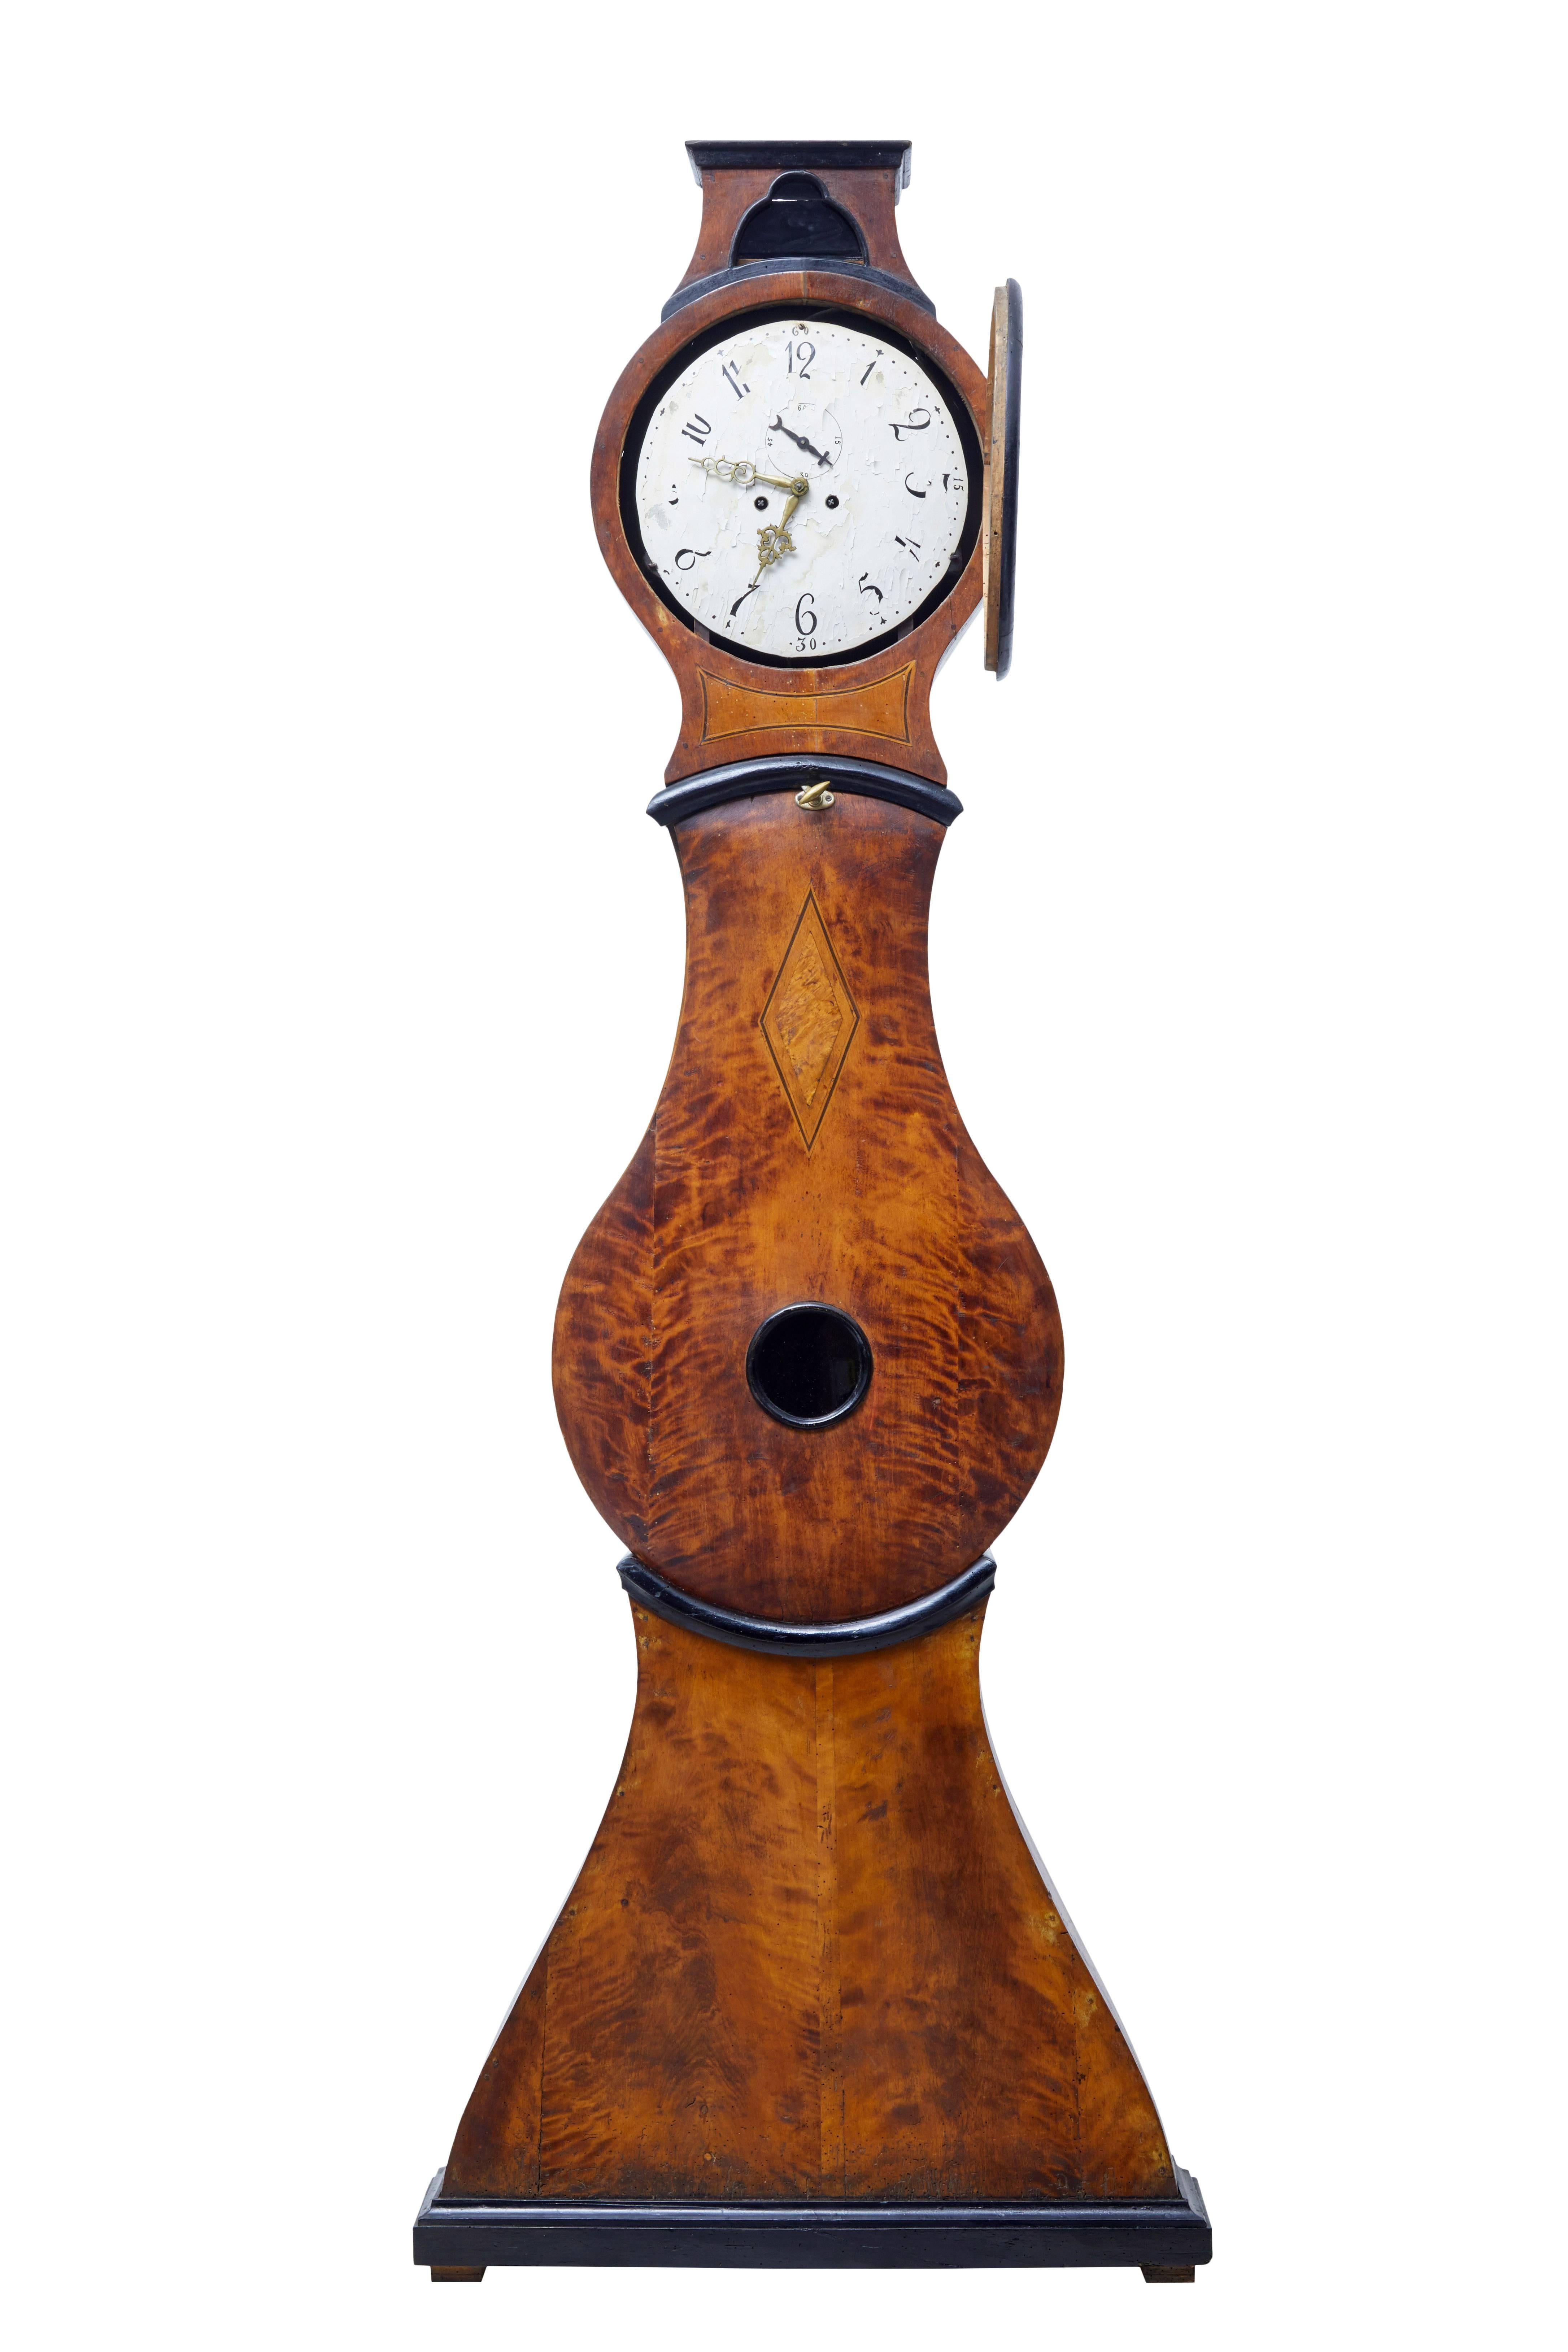 Elegant shaped Swedish Mora clock, circa 1840.

Beautifully made in burr birch and contrasting ebonized elements, with inlay and stringing to the body and hood.

Original face and movement, extensive losses to the enamel on the face but there is